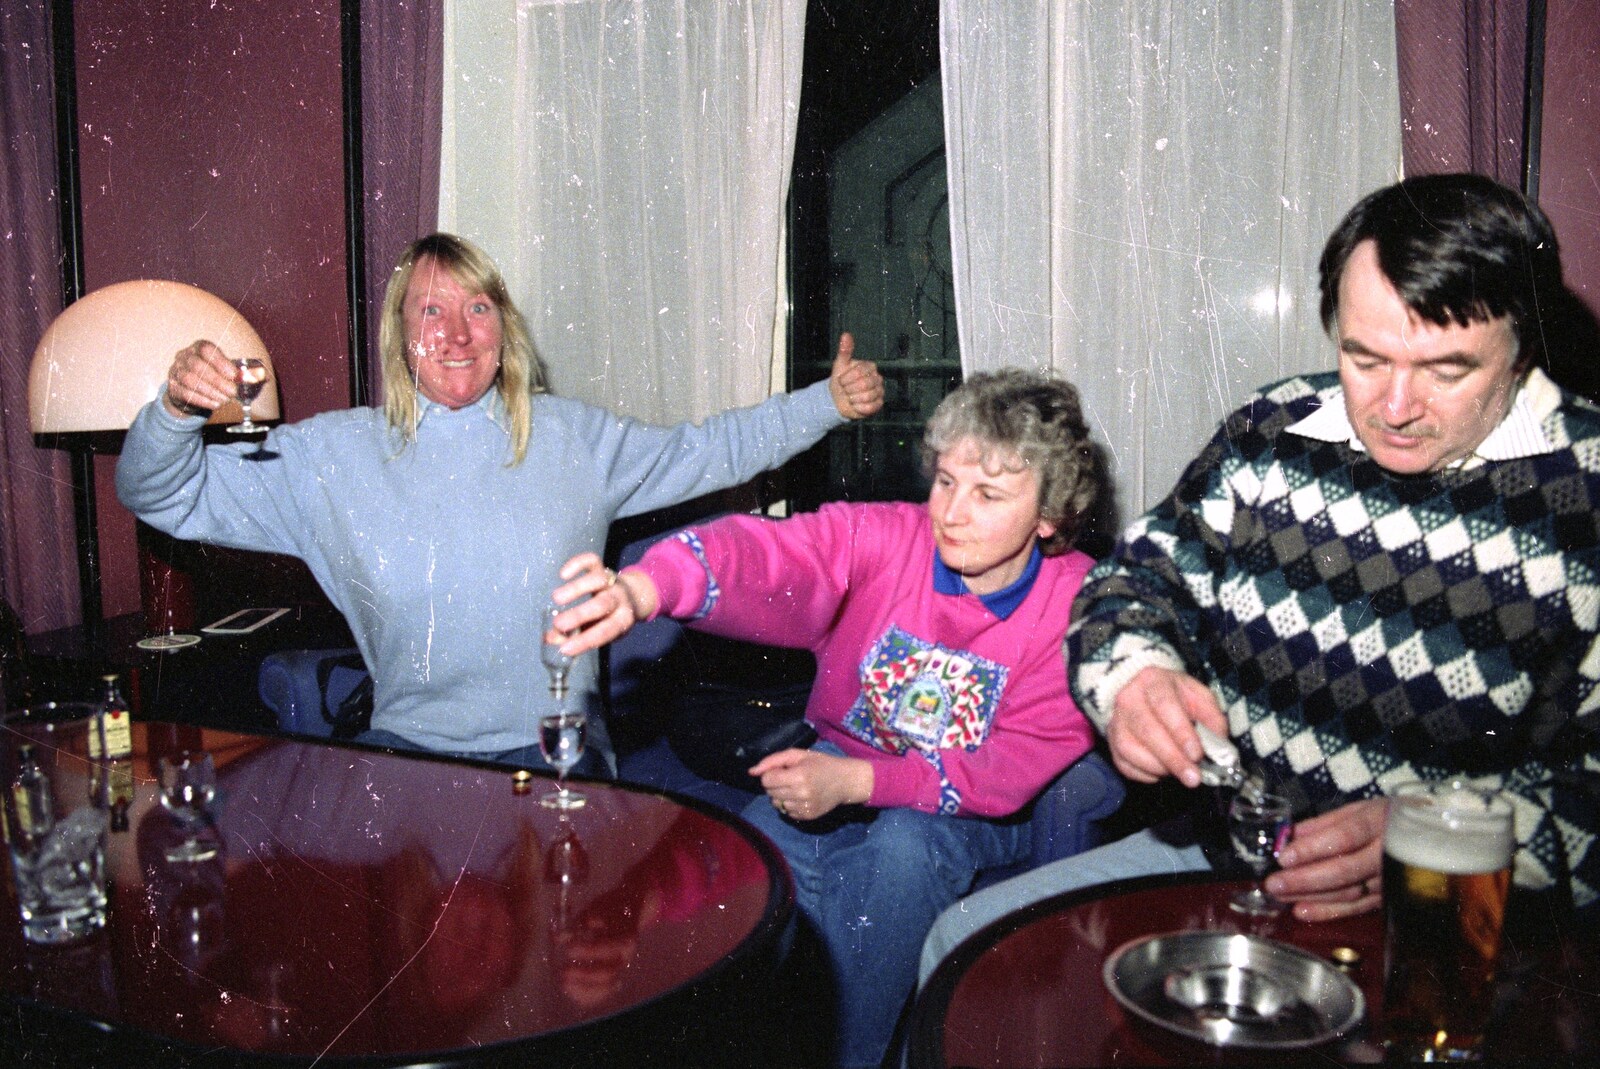 A Trip to Center Parcs, Eemhof, Netherlands - 24th March 1992: Sue, Linda and Corky drink Jenever on the ferry